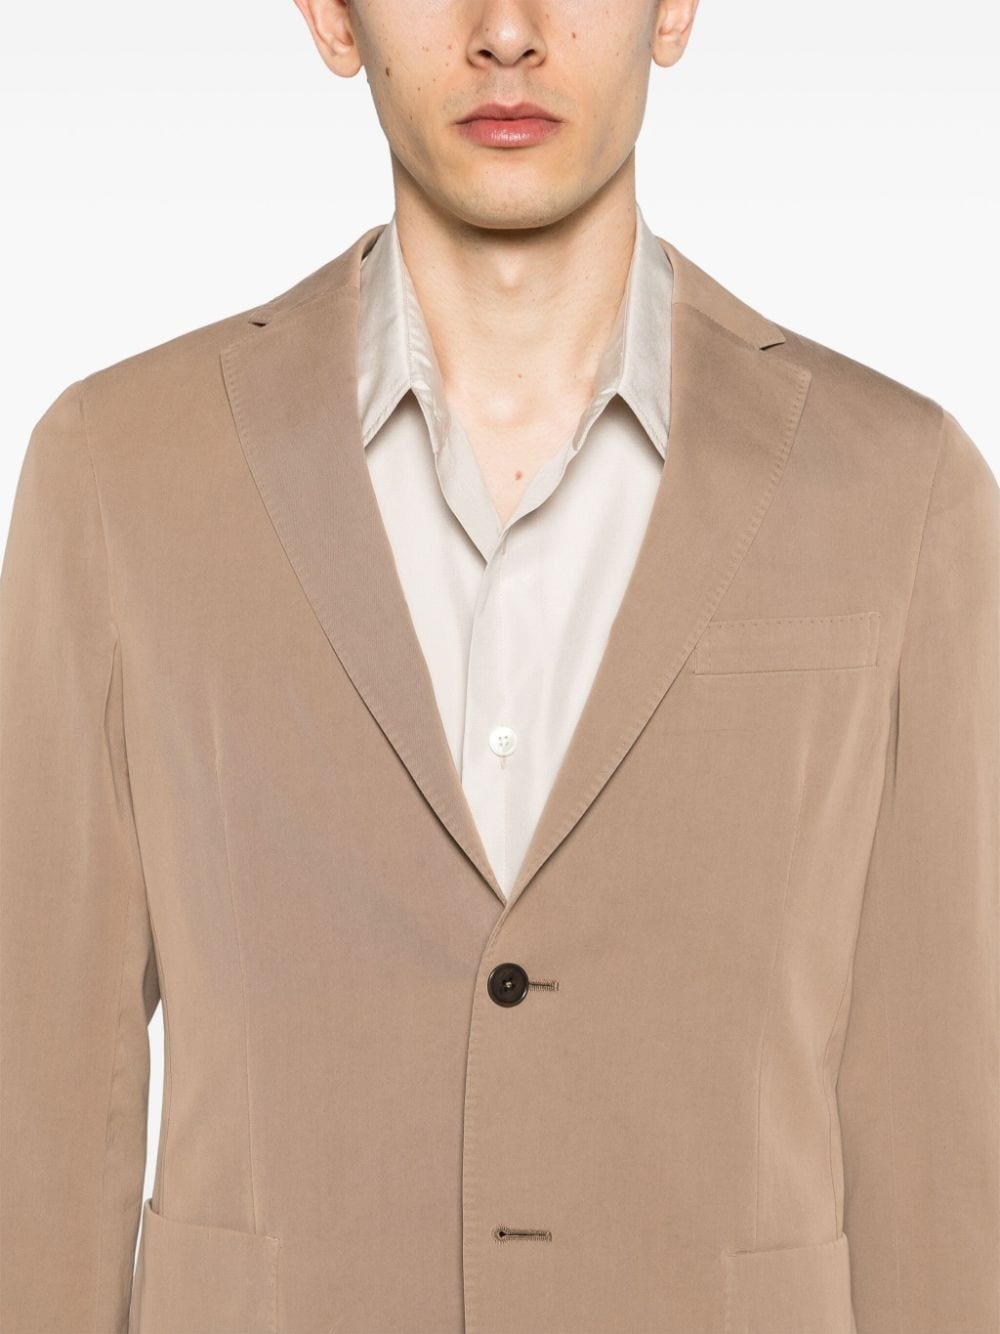 notched-lapels single-breasted suit - 5